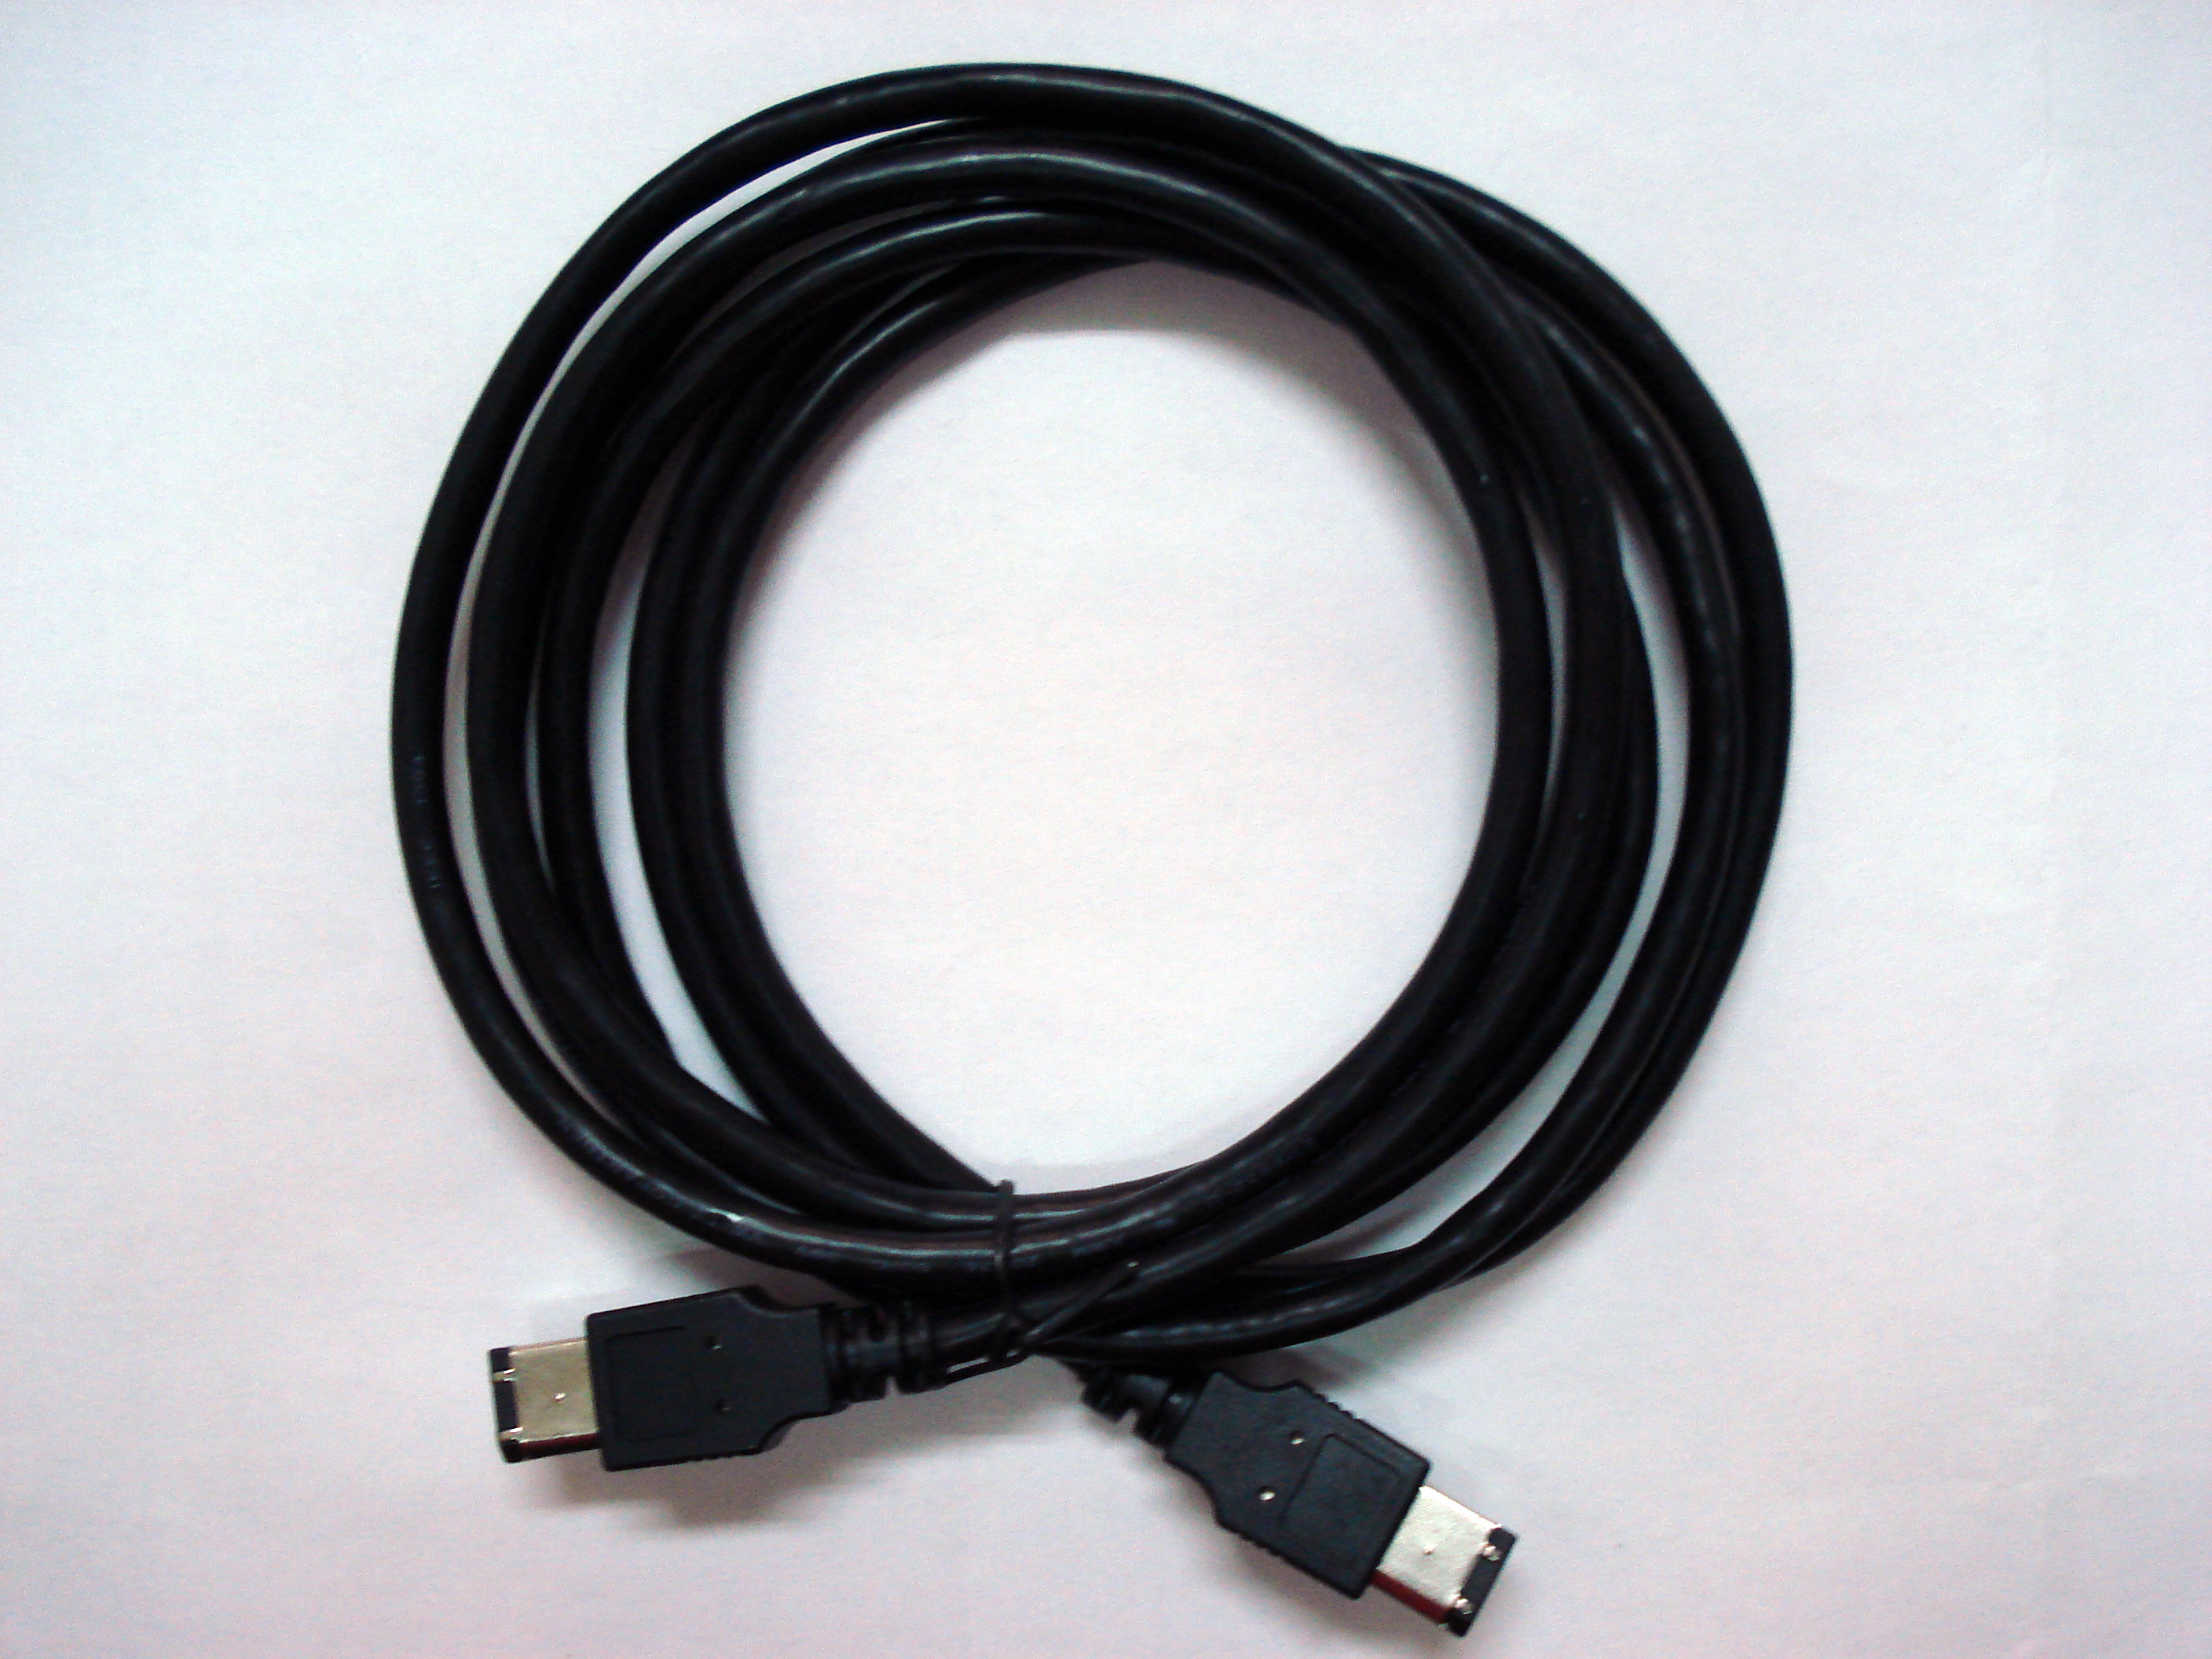 1394 Cable - IEEE 1394 cables